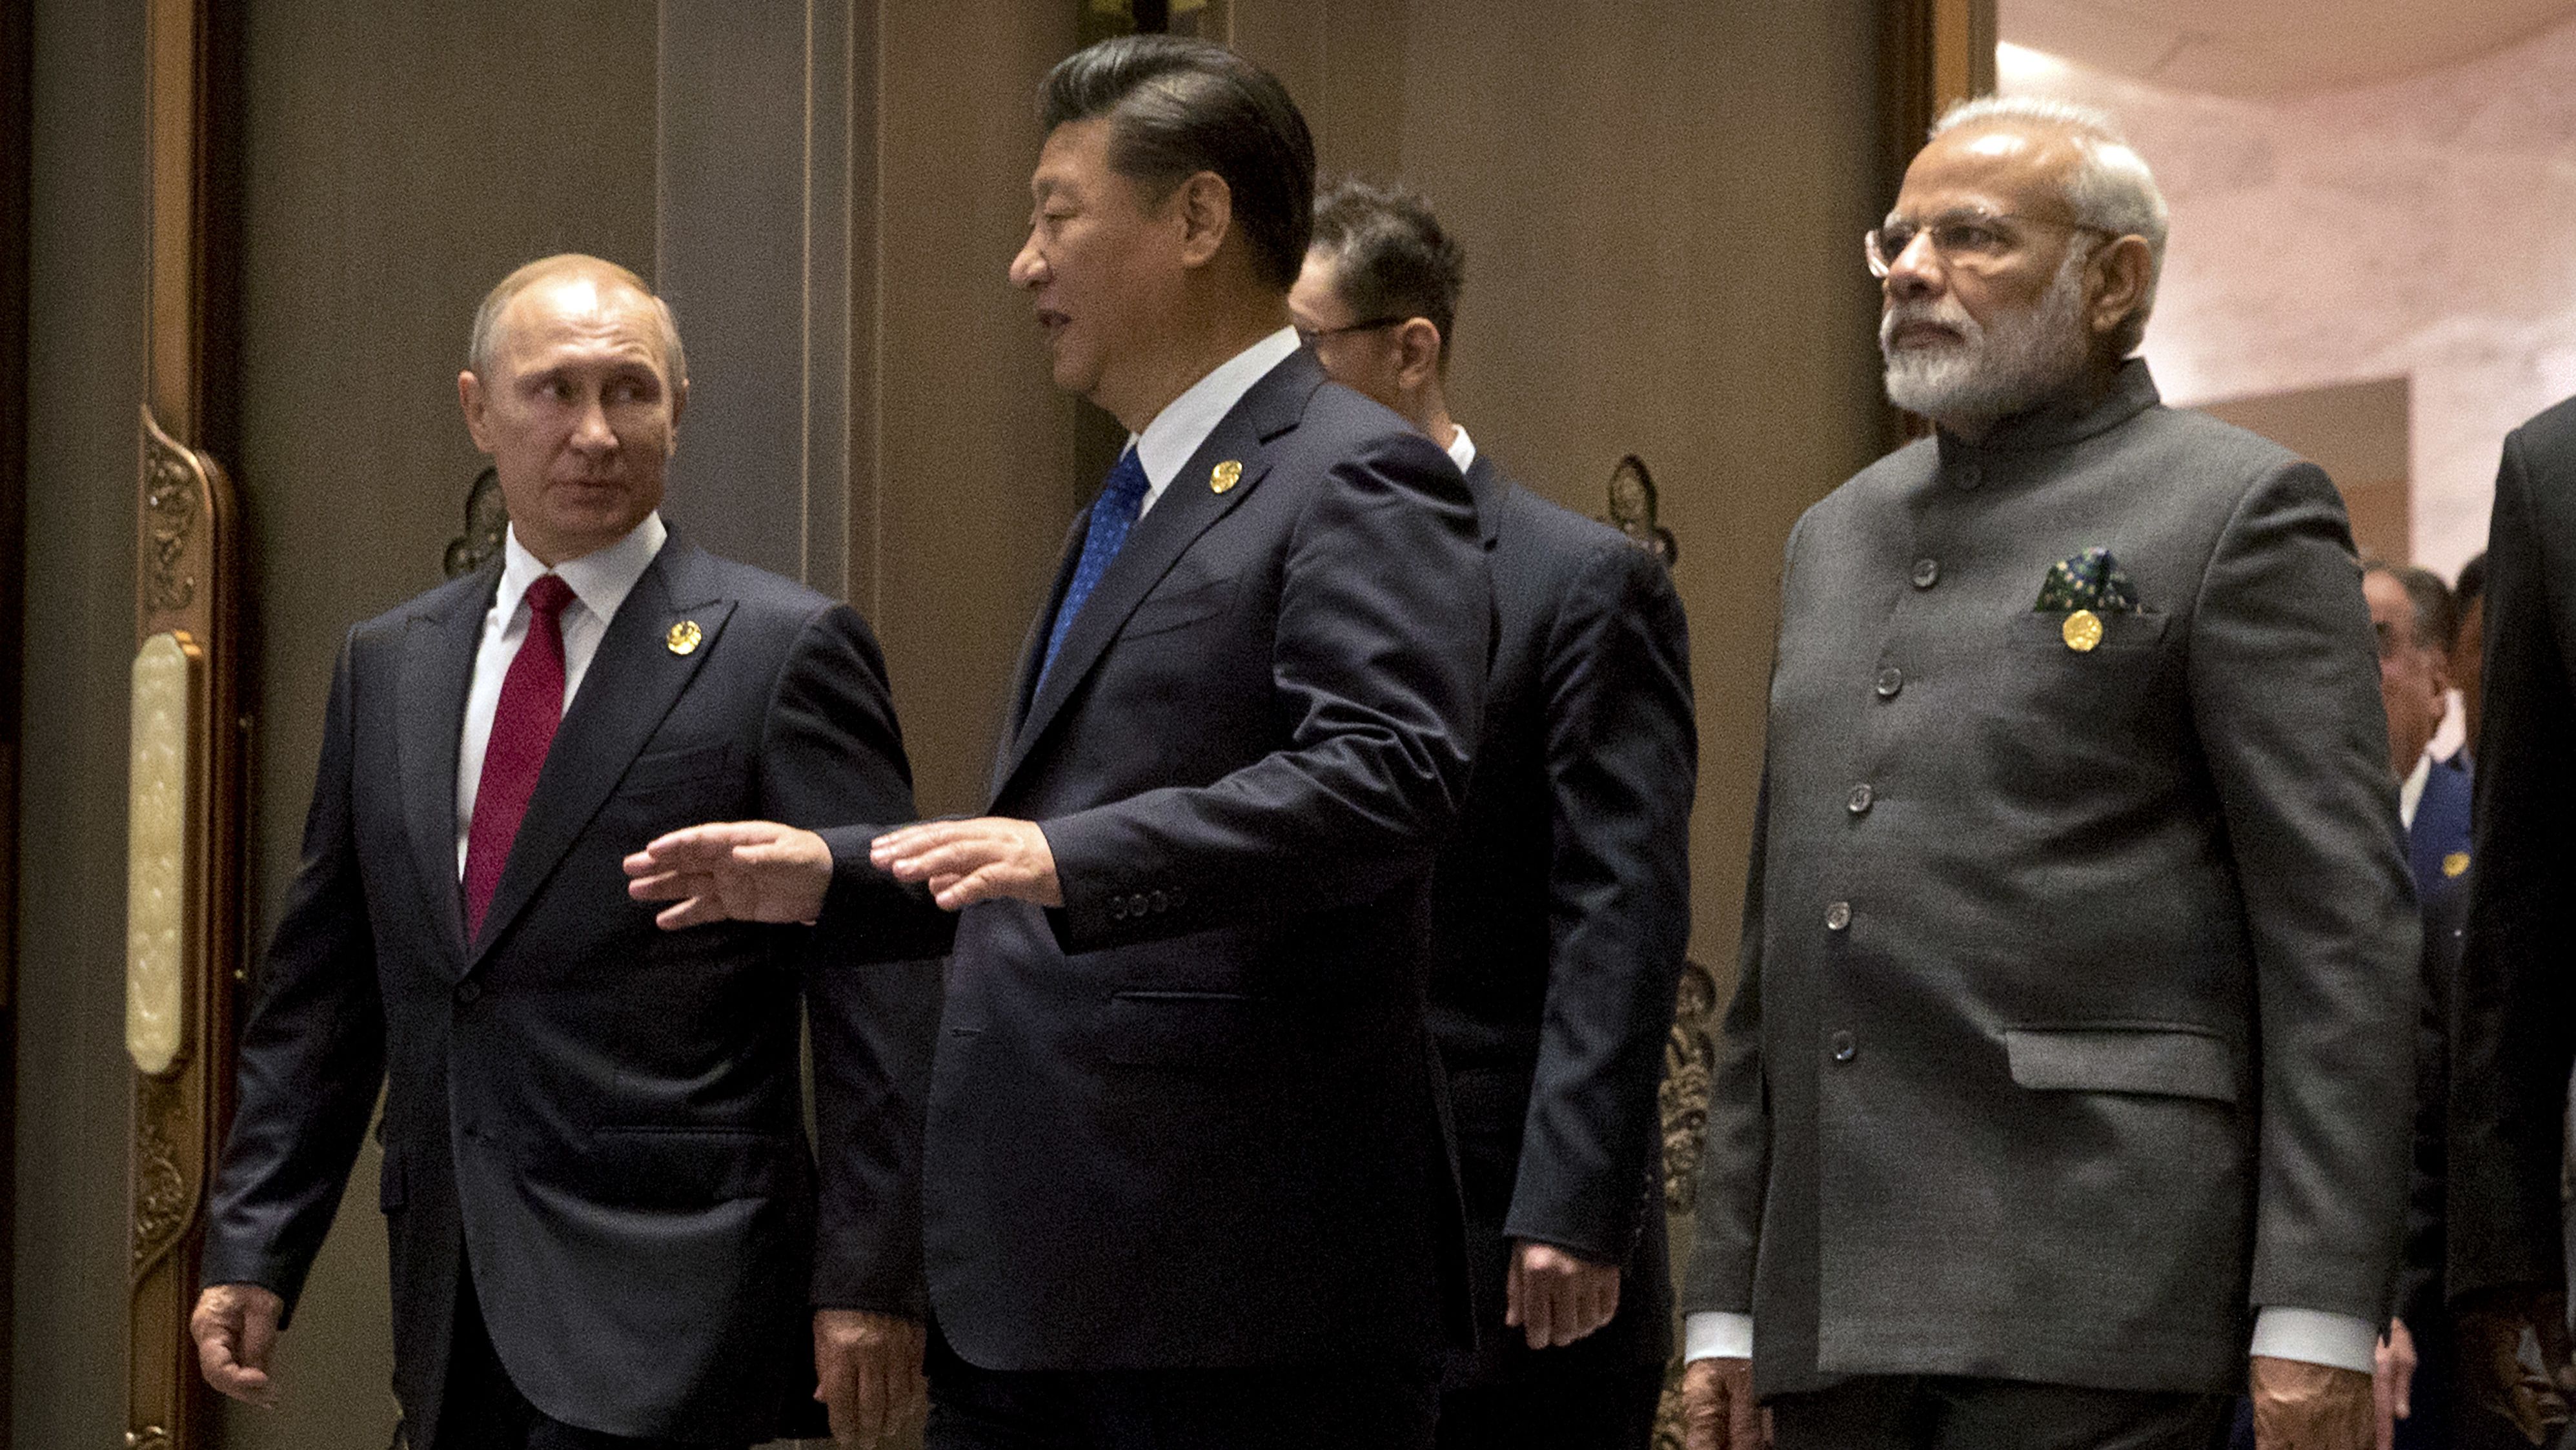 Russian President Vladimir Putin, Chinese President Xi Jinping and Indian Prime Minister Narendra Modi pictured on the sidelines of the 2017 BRICS Summit in Xiamen, southeastern China.